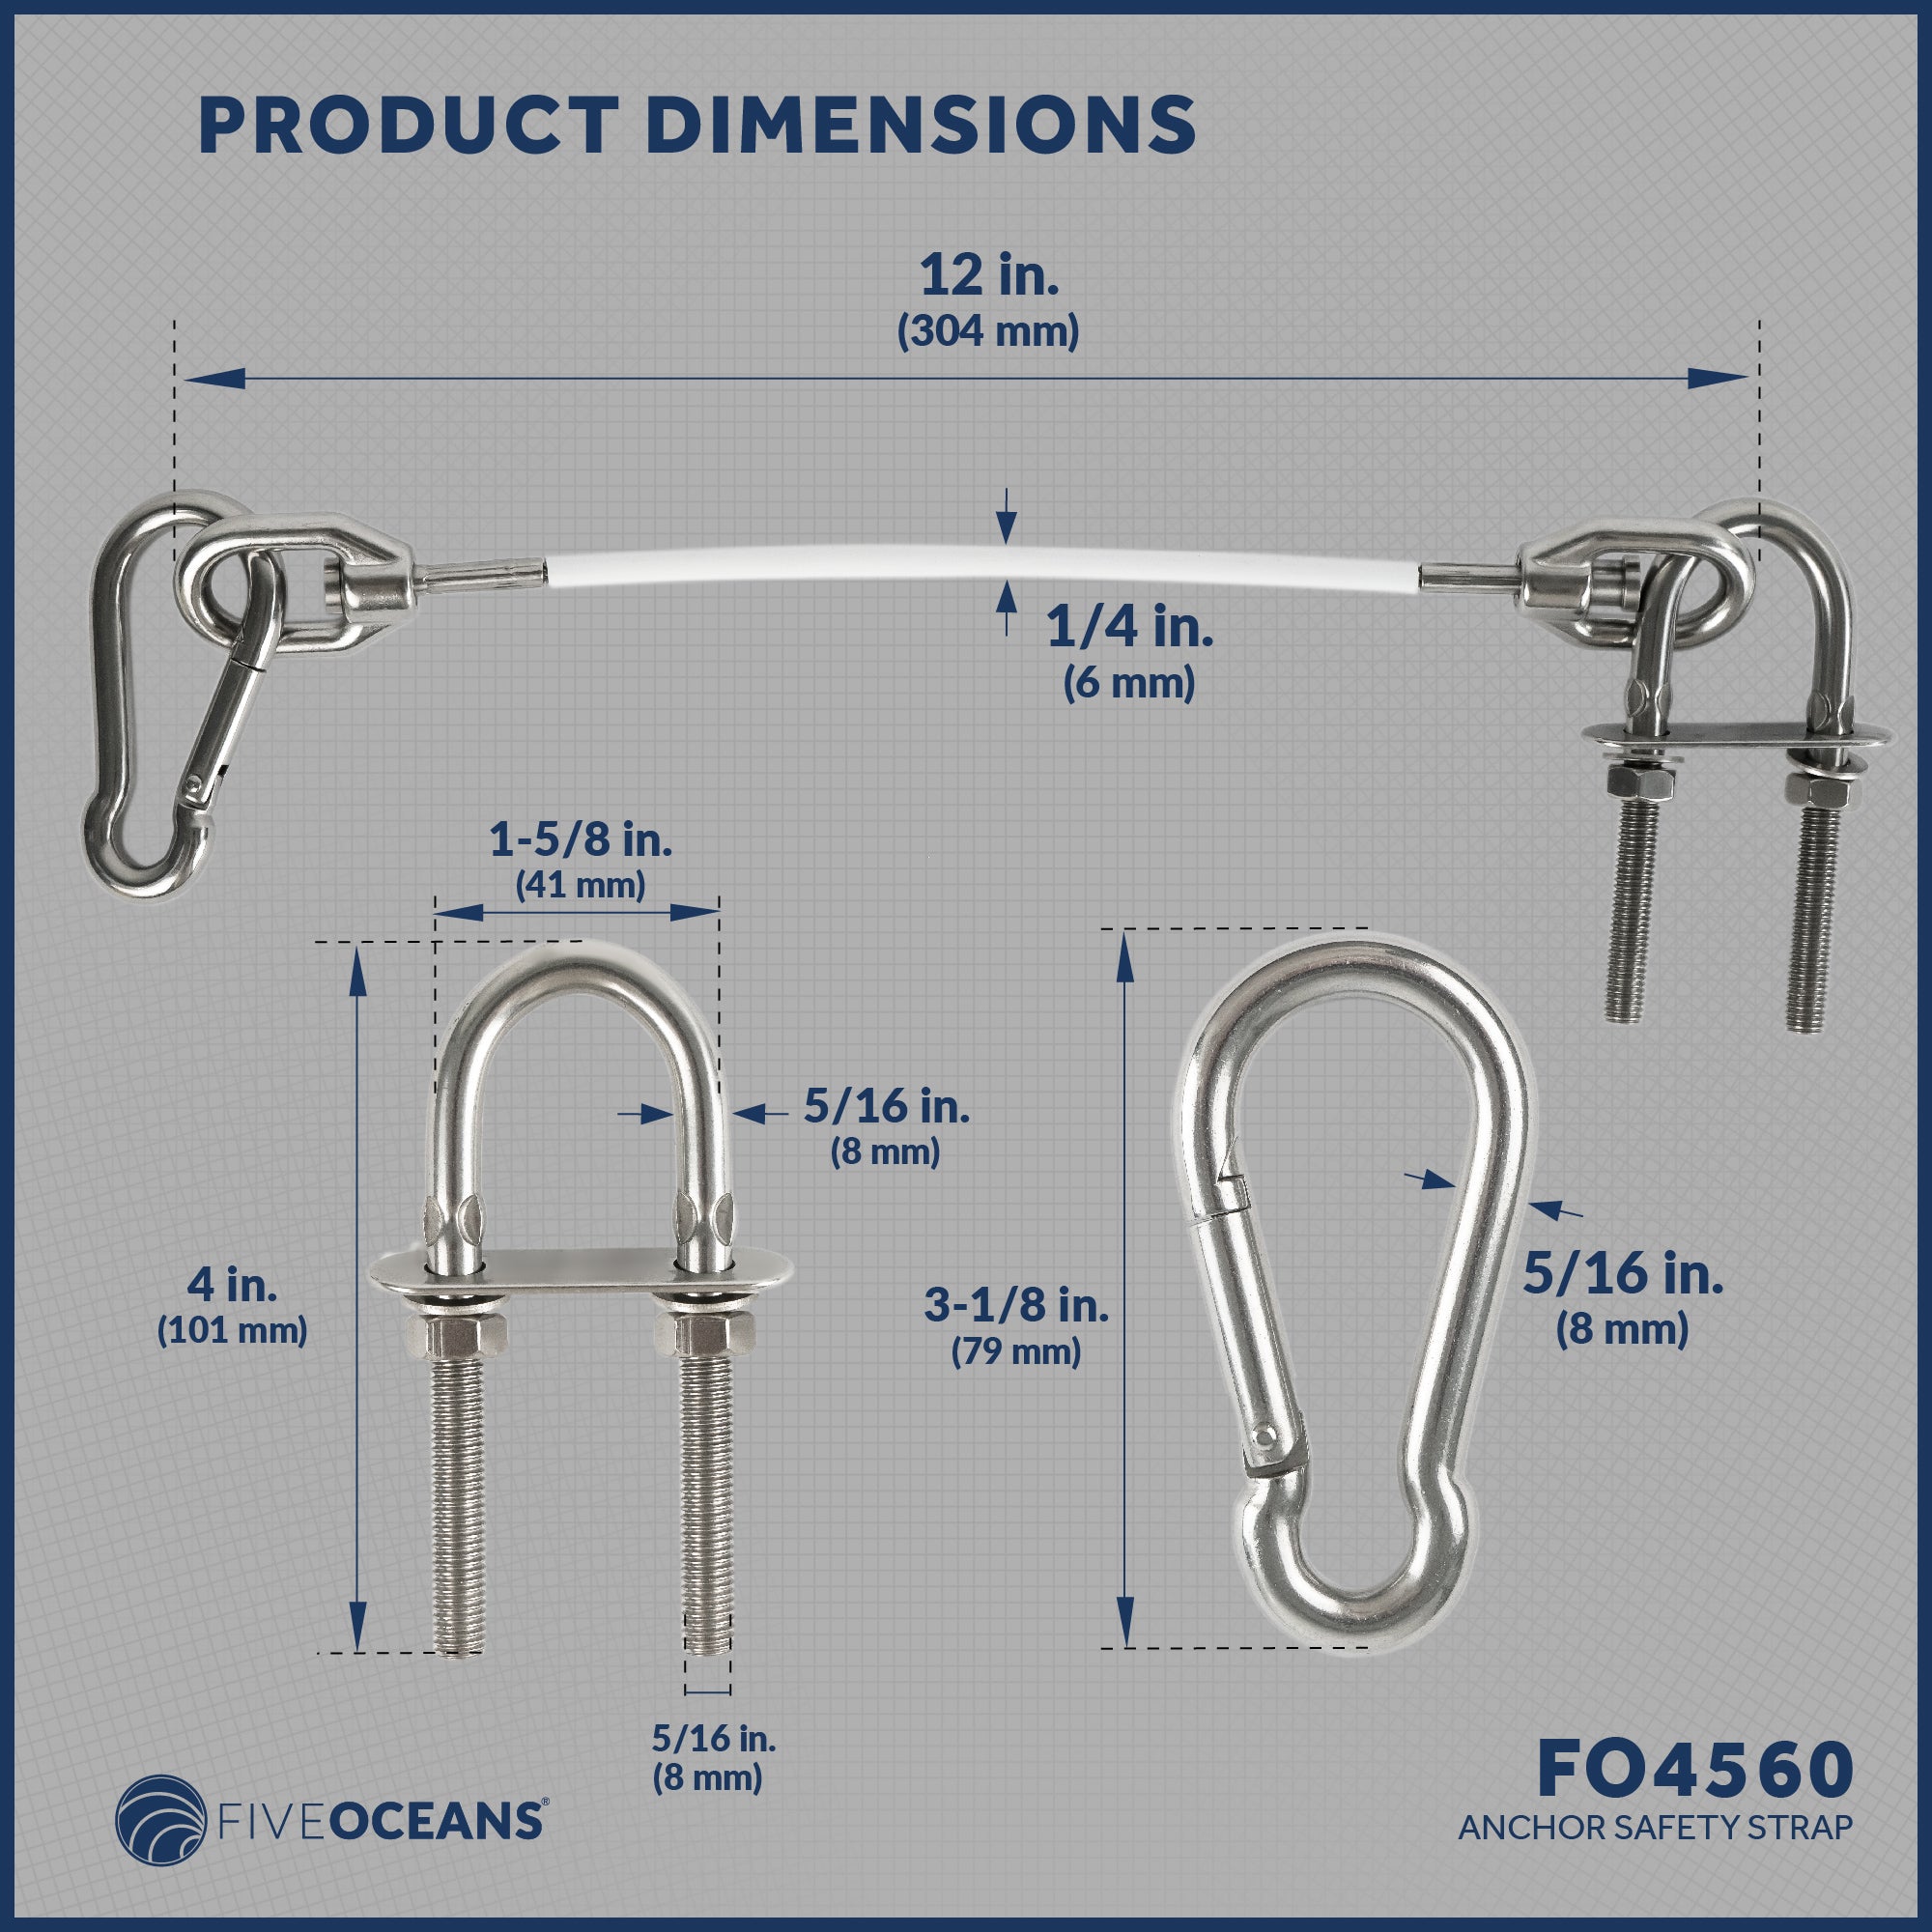 Anchor Safety Strap, Snap Hook Carabiner and 5/16 U-Bolt - FO4560